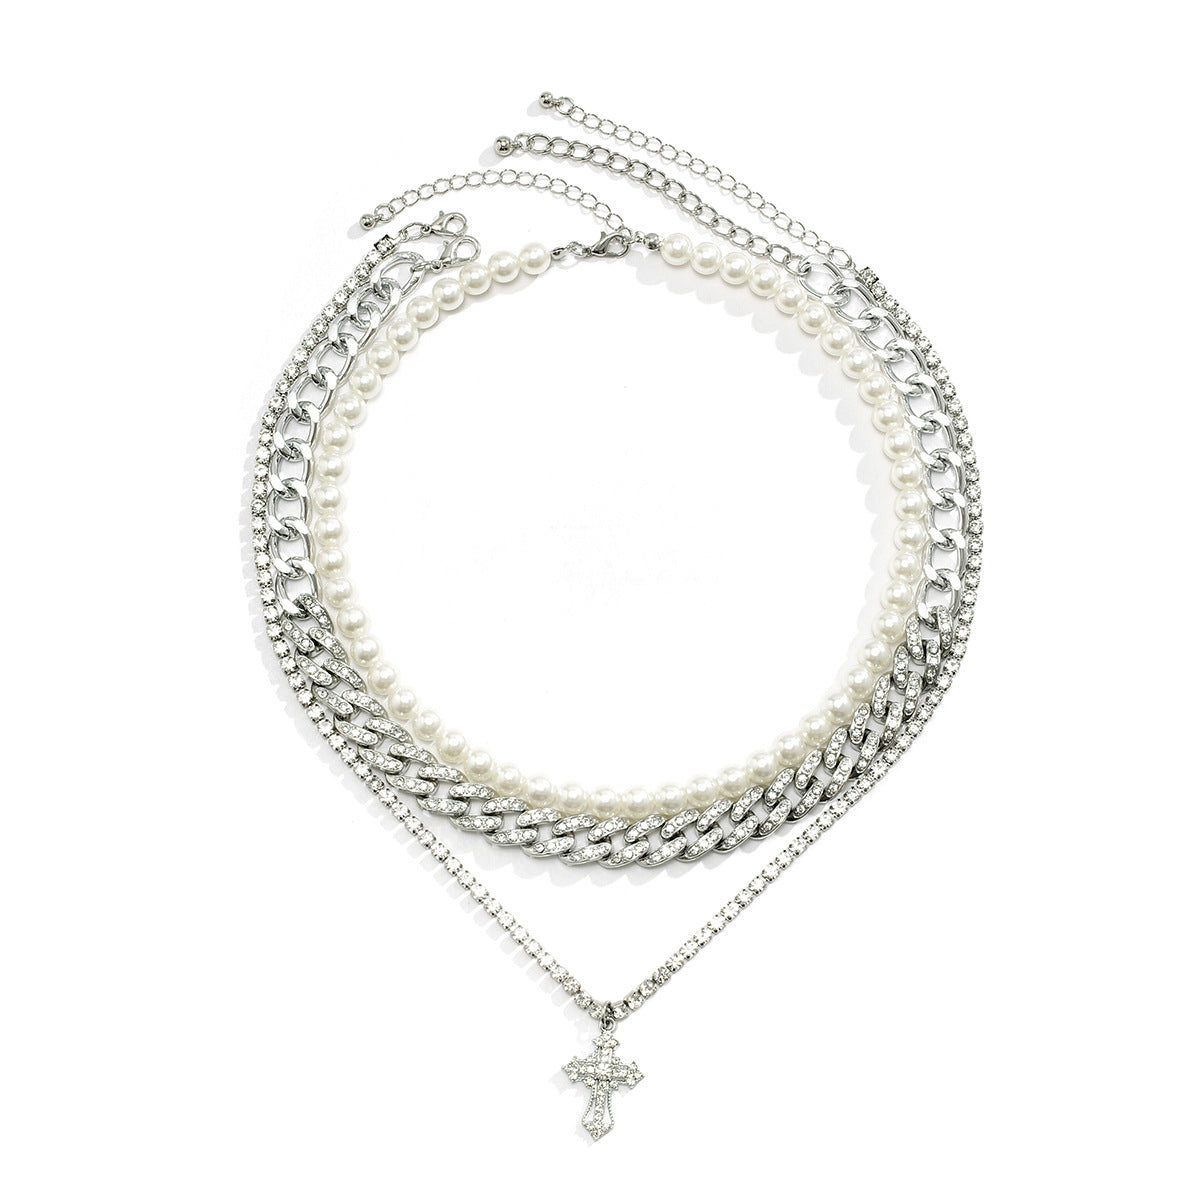 Trendy and fashionable pearls with Cuban chain and cross-studded diamond multi-layer design versatile necklace